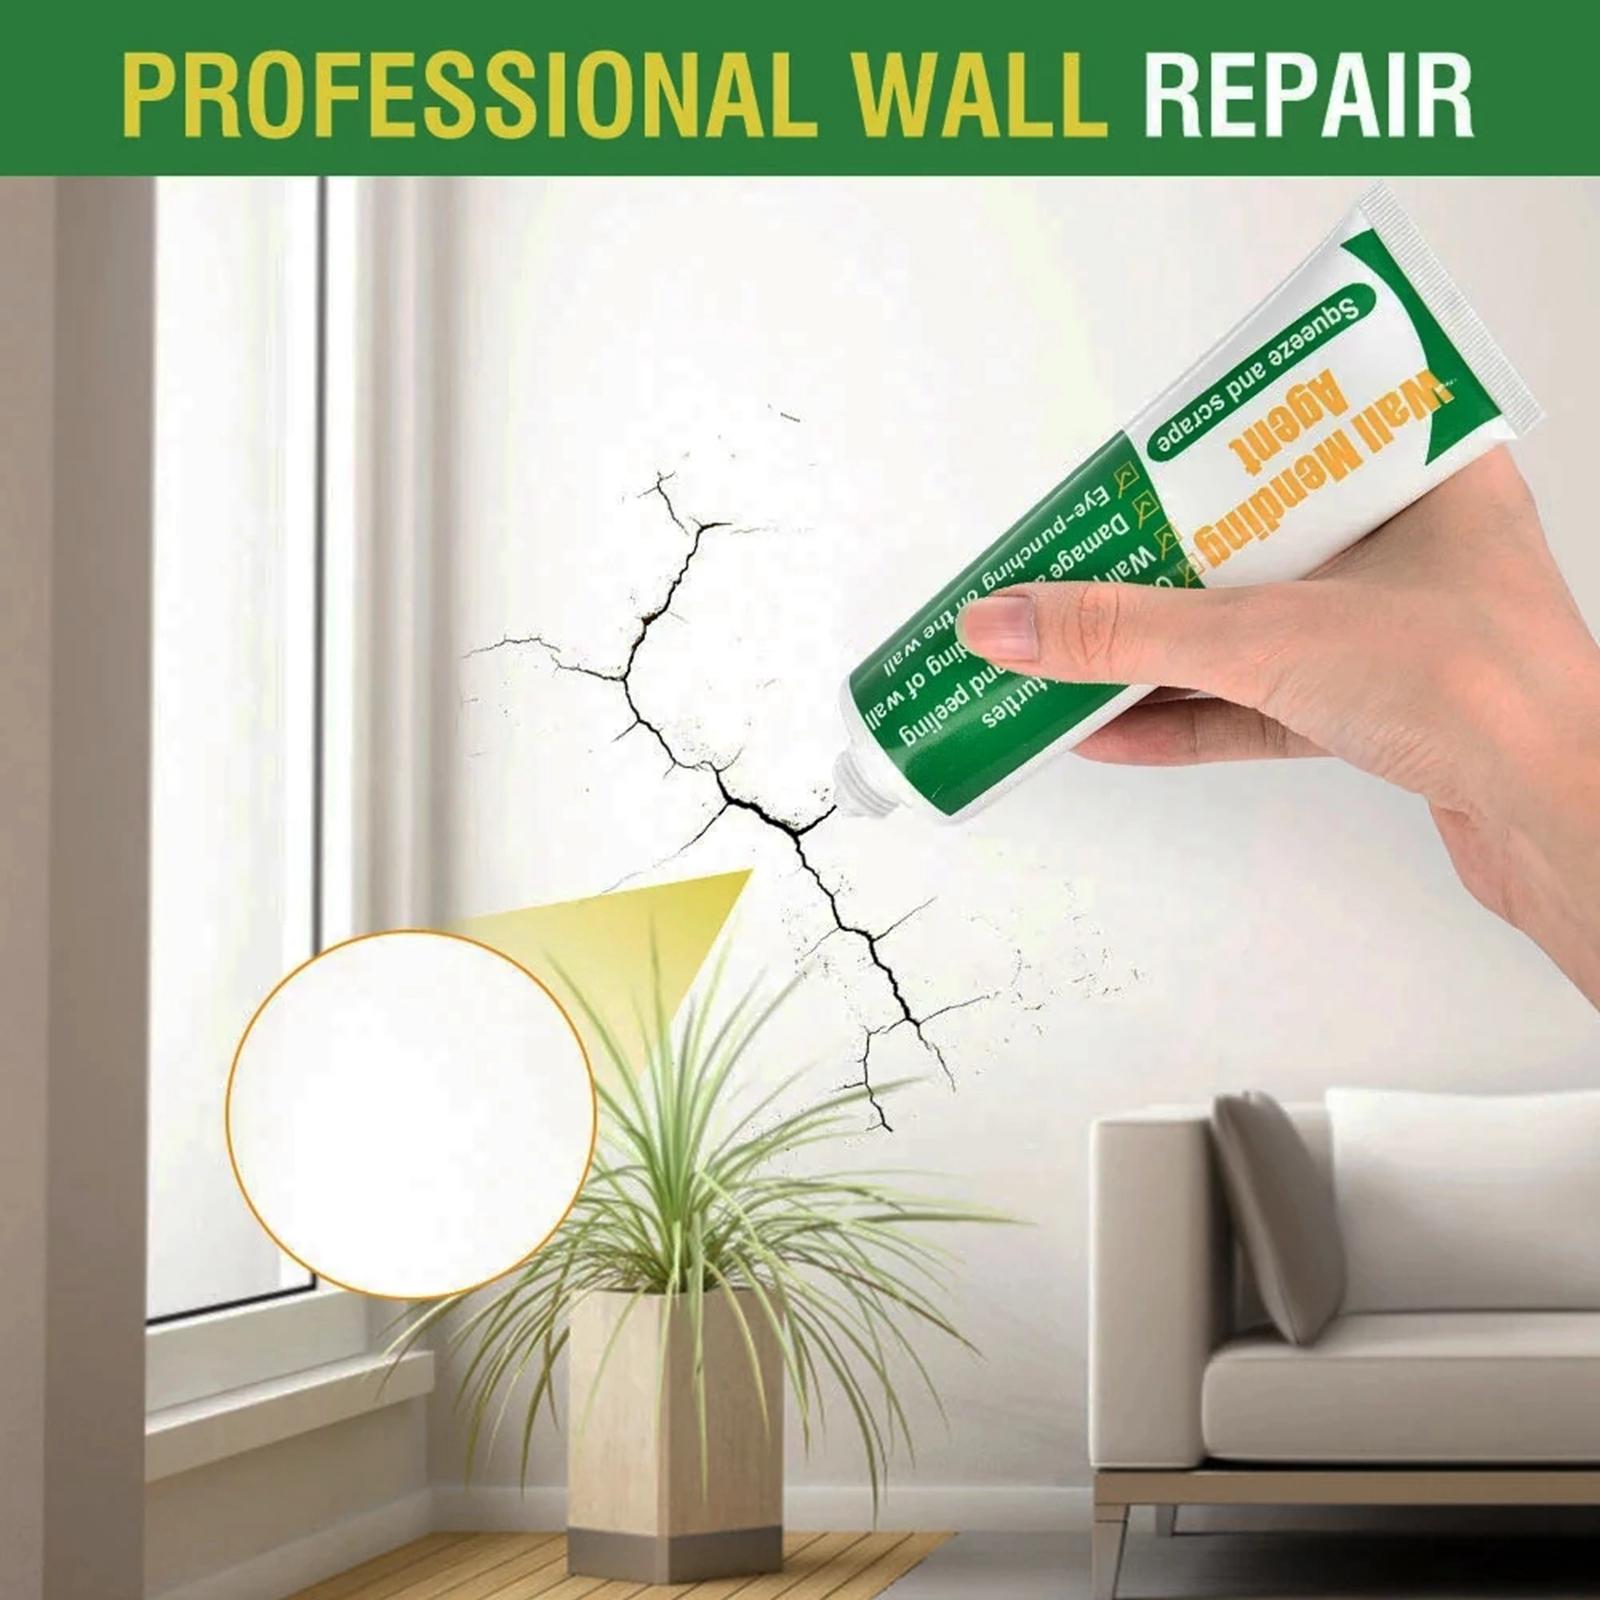 Repair Putty Patch Kit with Pointed Nozzle, Scraper Board, Wall Repair Cream